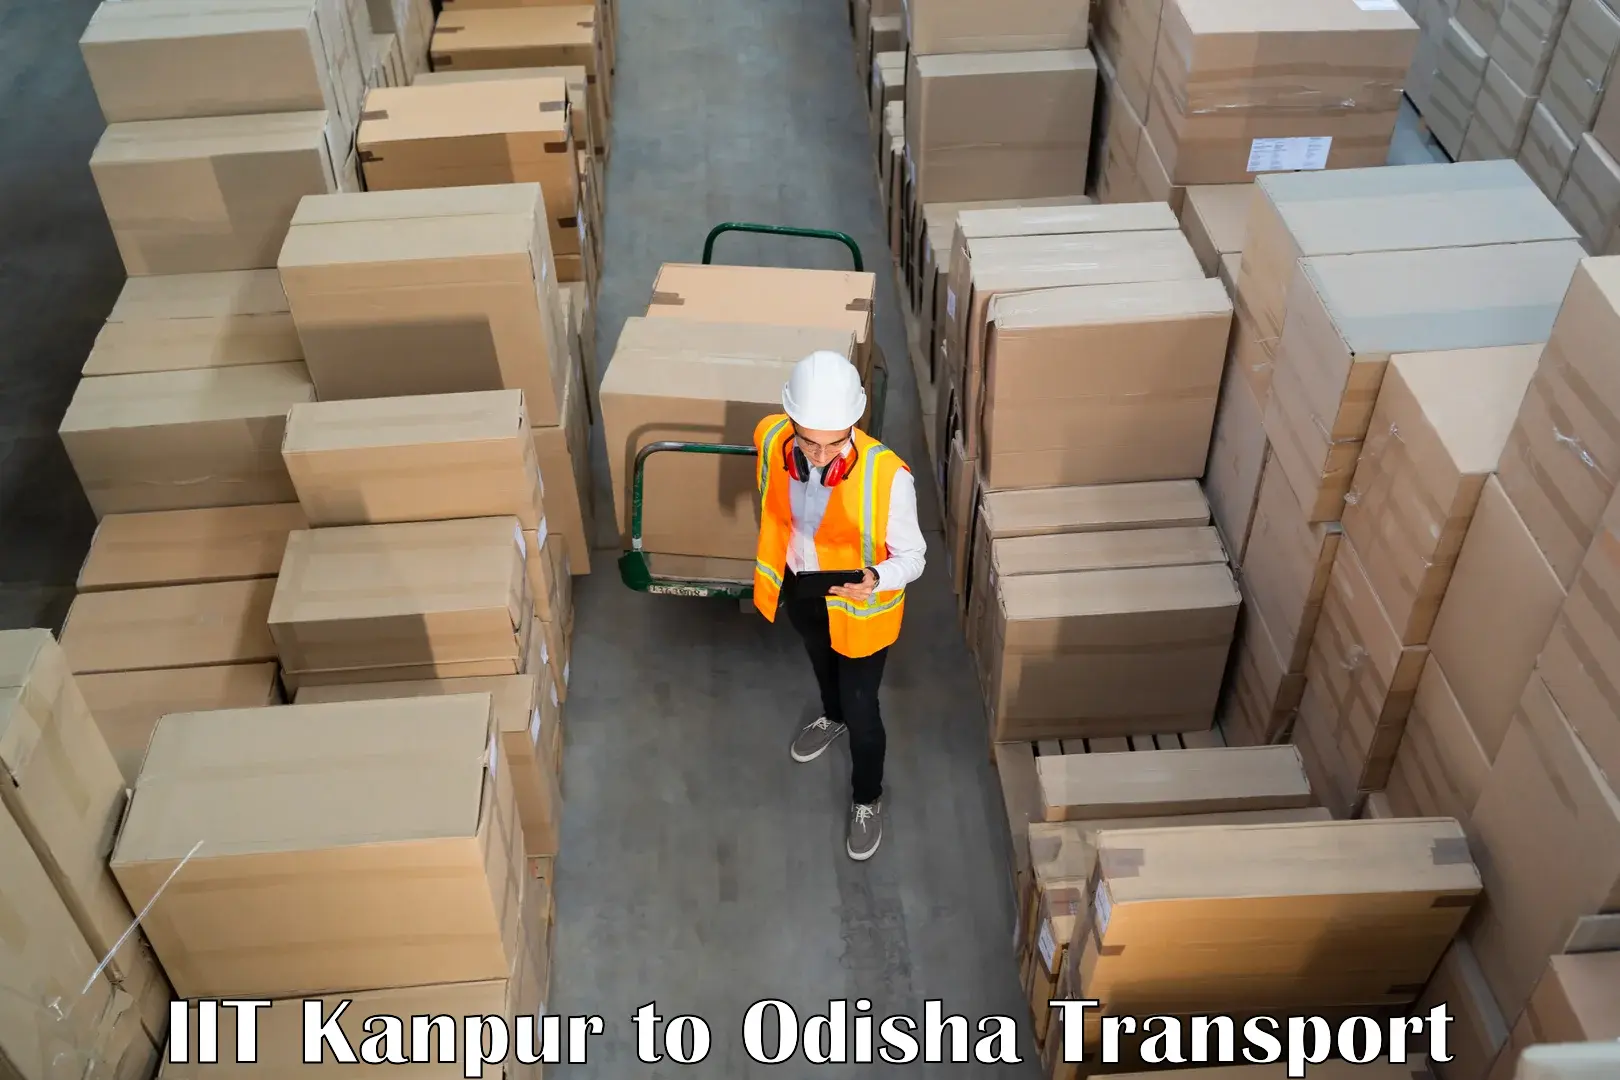 Daily parcel service transport IIT Kanpur to Paradip Port